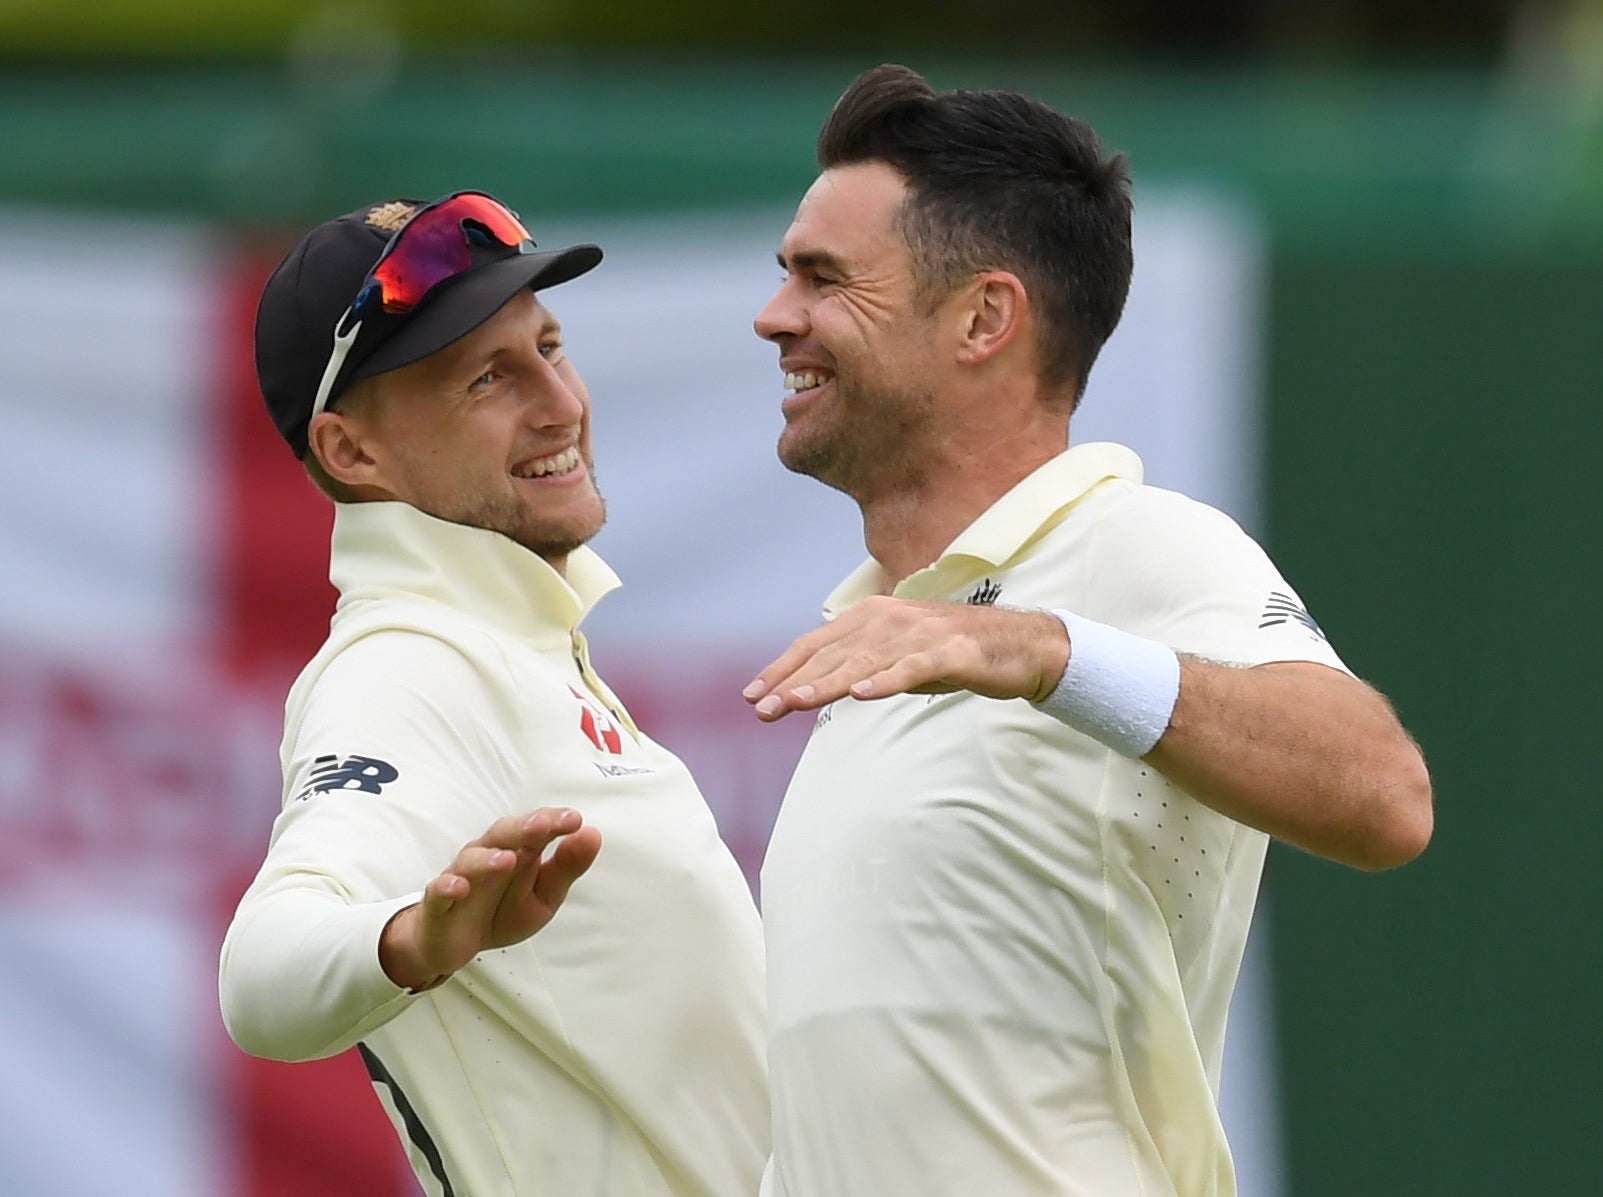 James Anderson aware his work is not yet done in second Test after rolling back the years once again